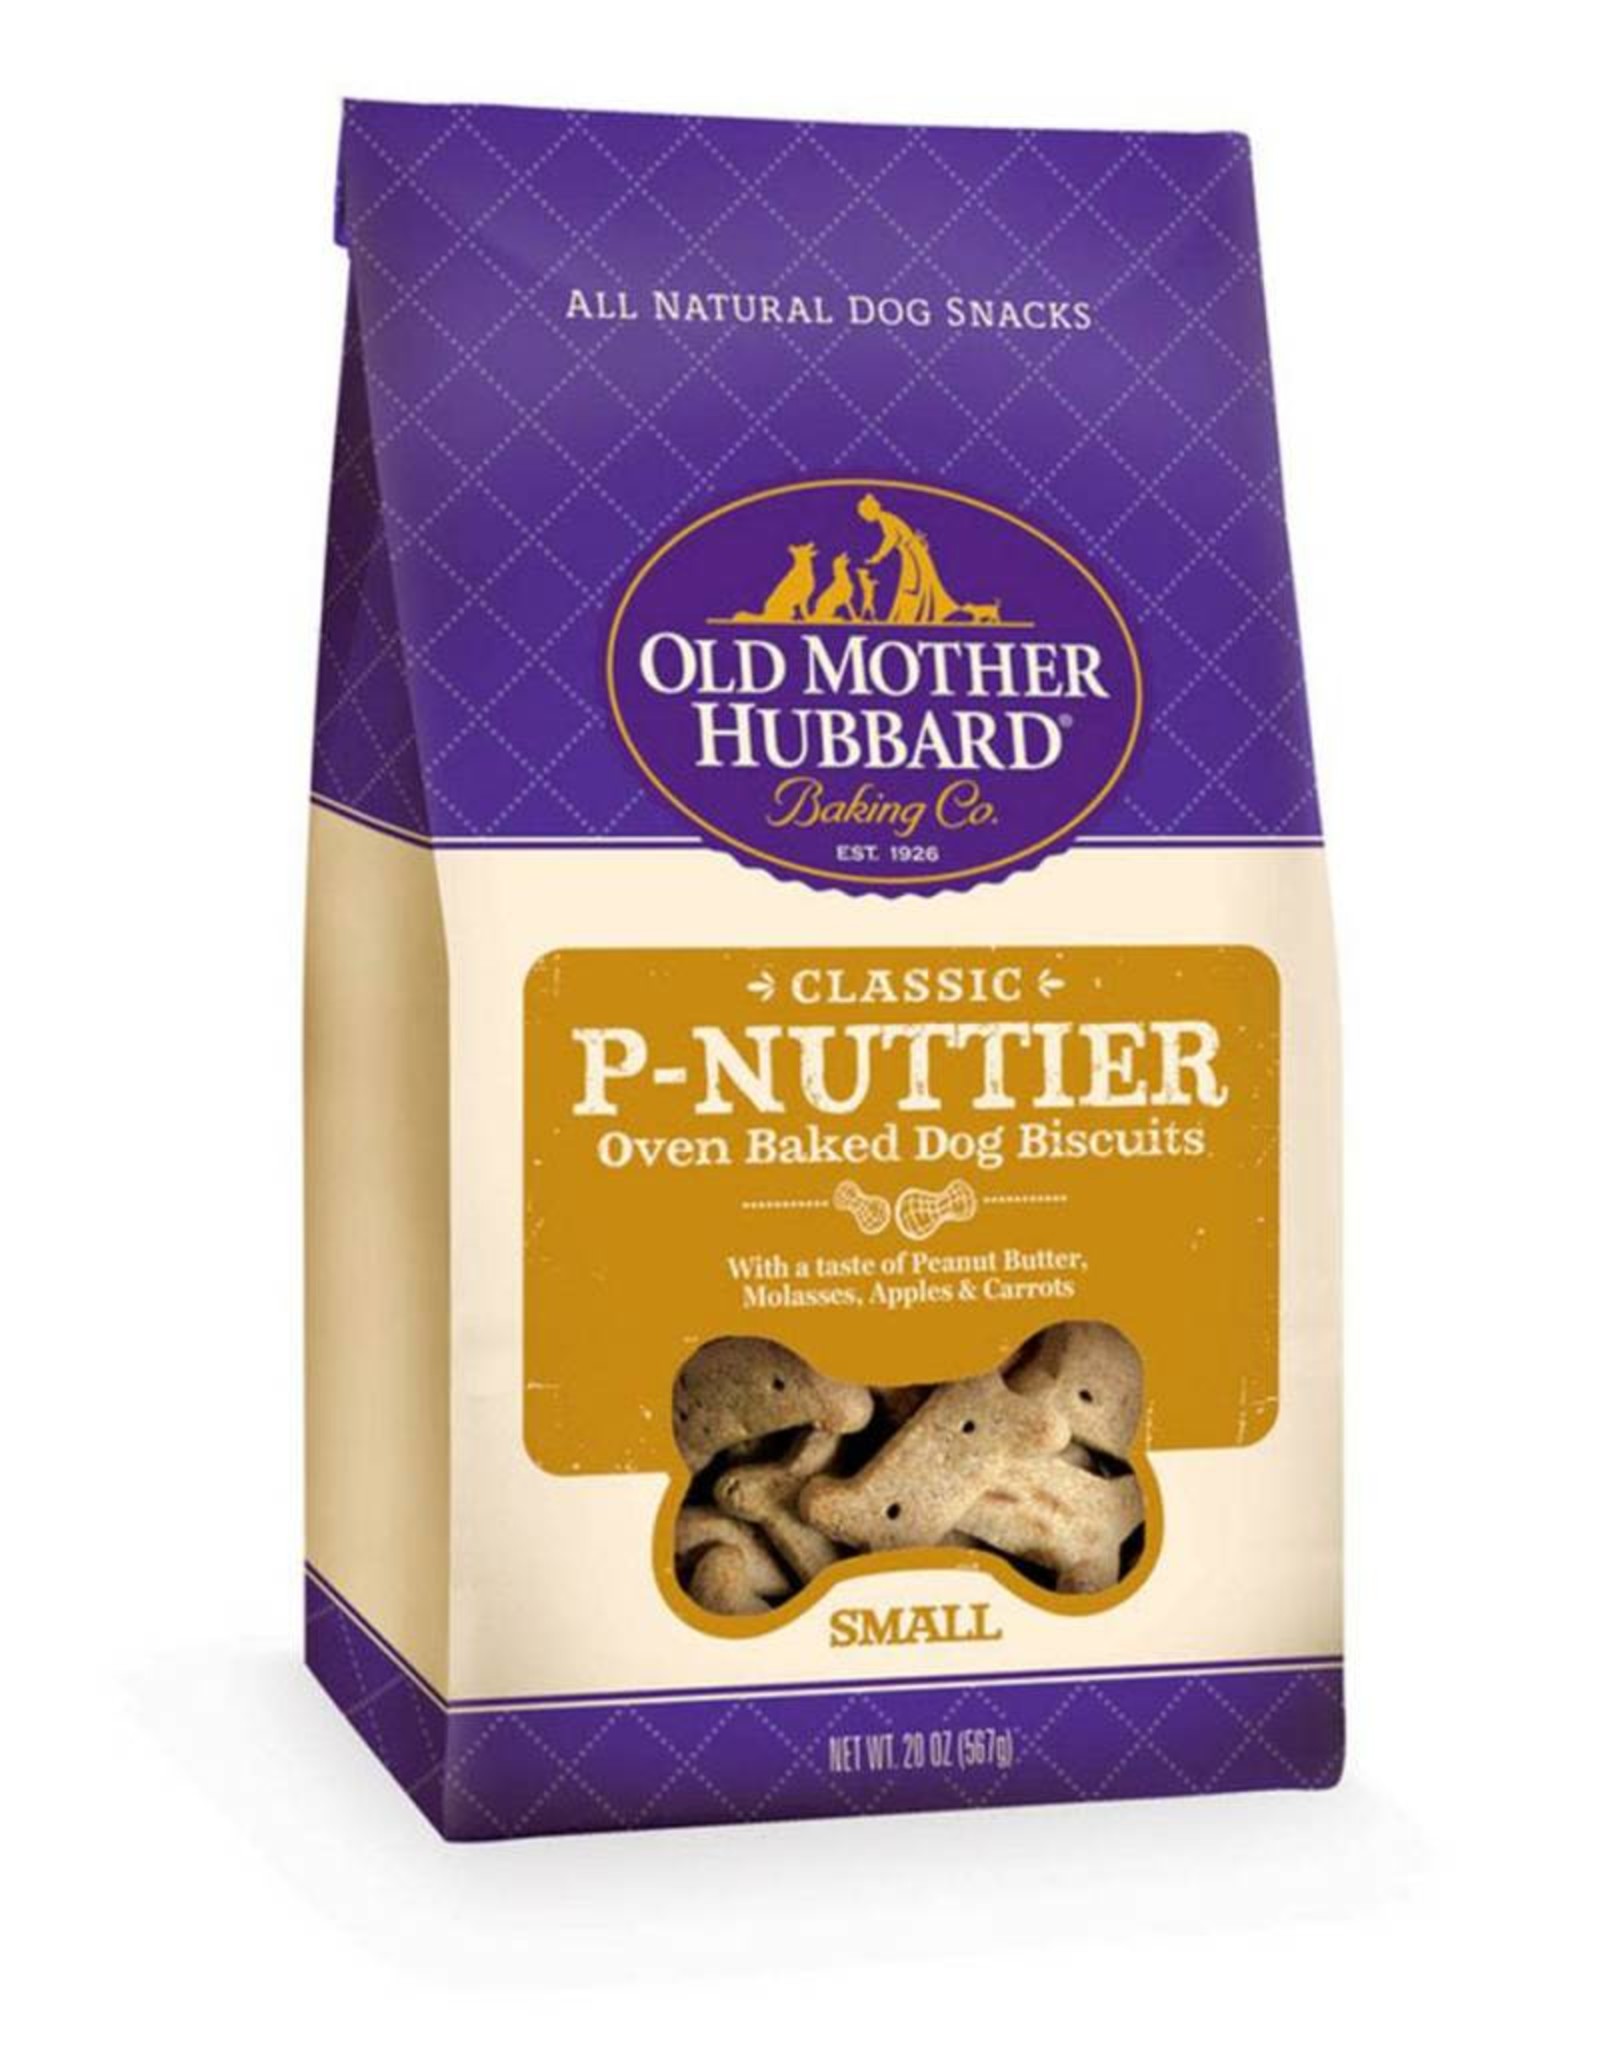 Old Mother Hubbard Old Mother Hubbard Classic P-Nuttier Biscuits Baked Dog Treats-